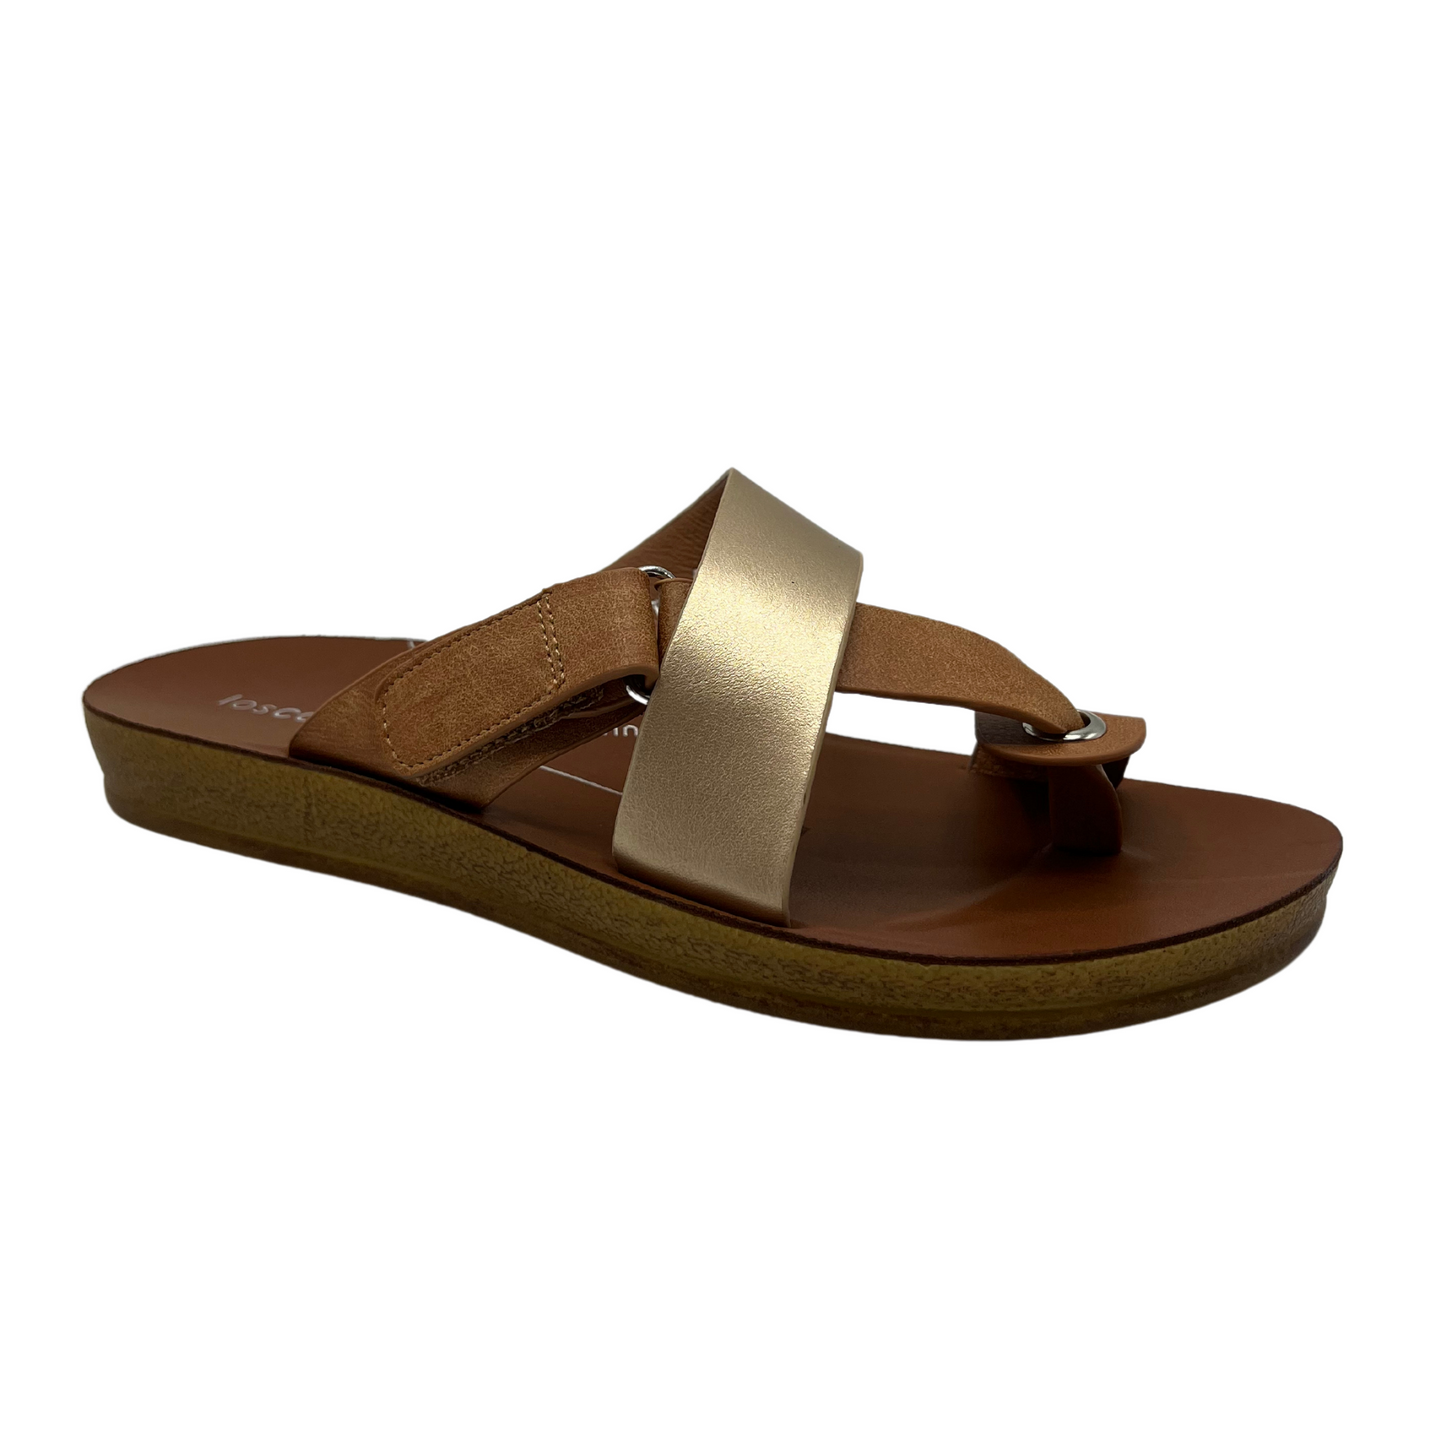 45 degree angled view of brown and gold strapped sandal with toe strap and velcro closure